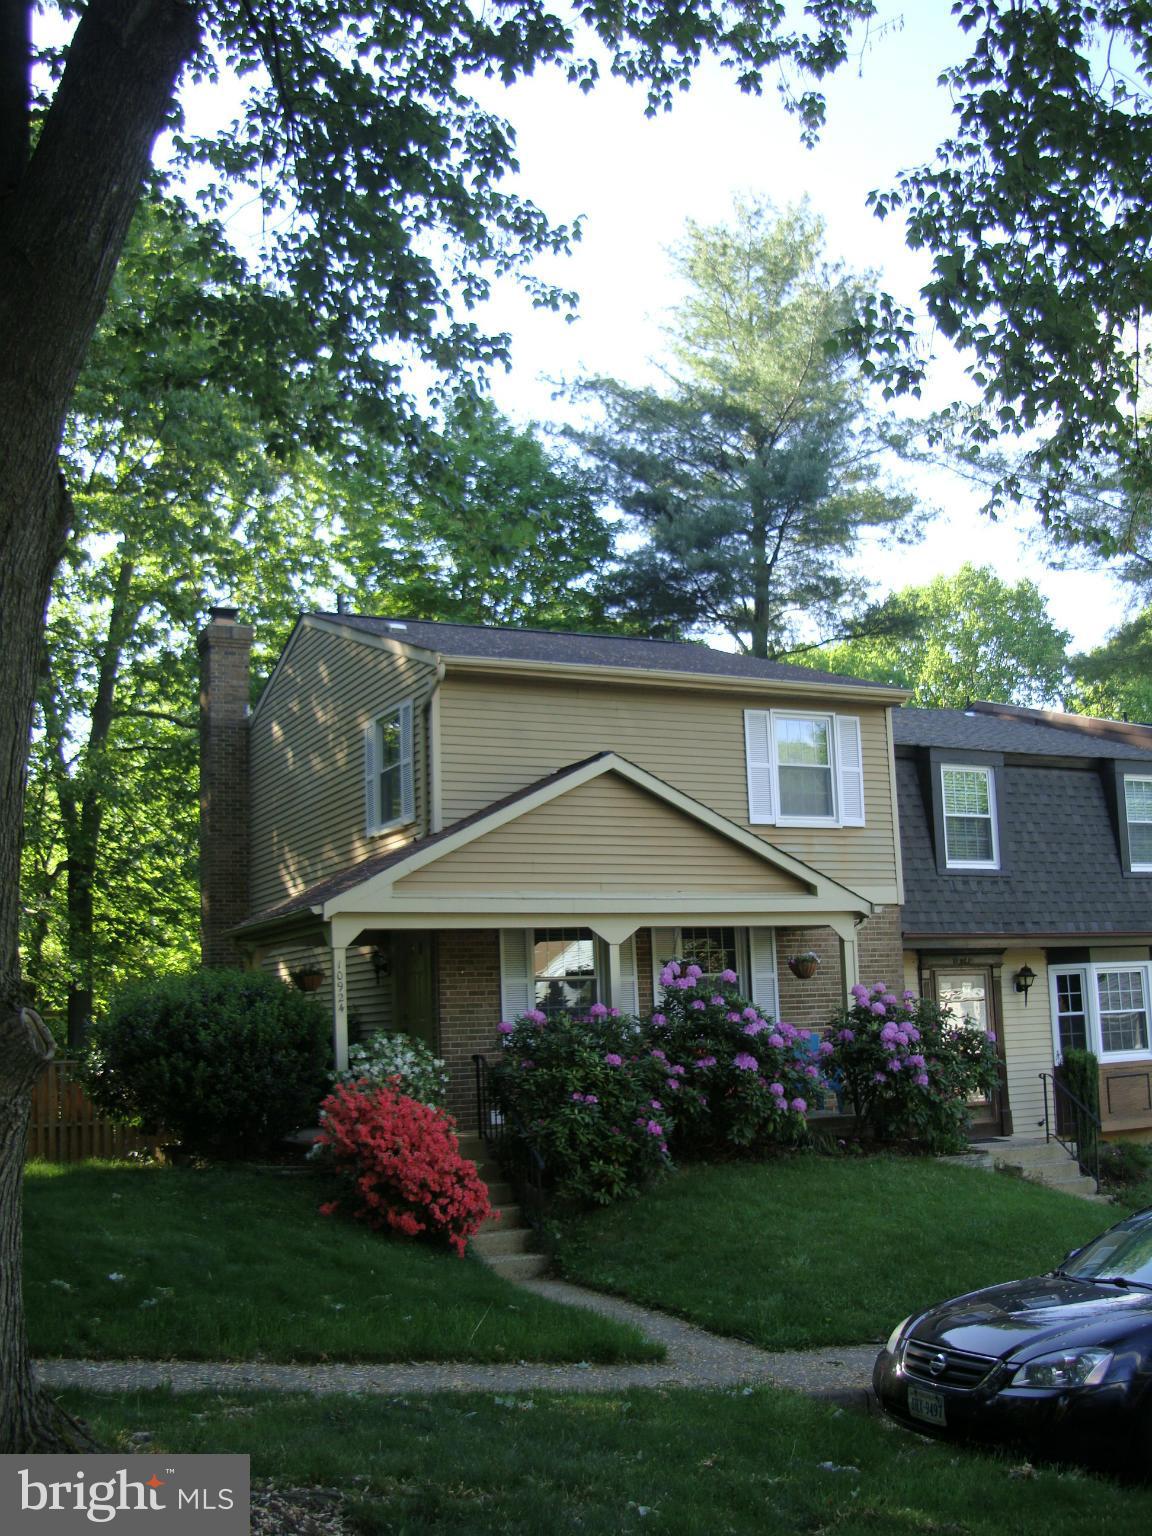 a front view of a house with a garden